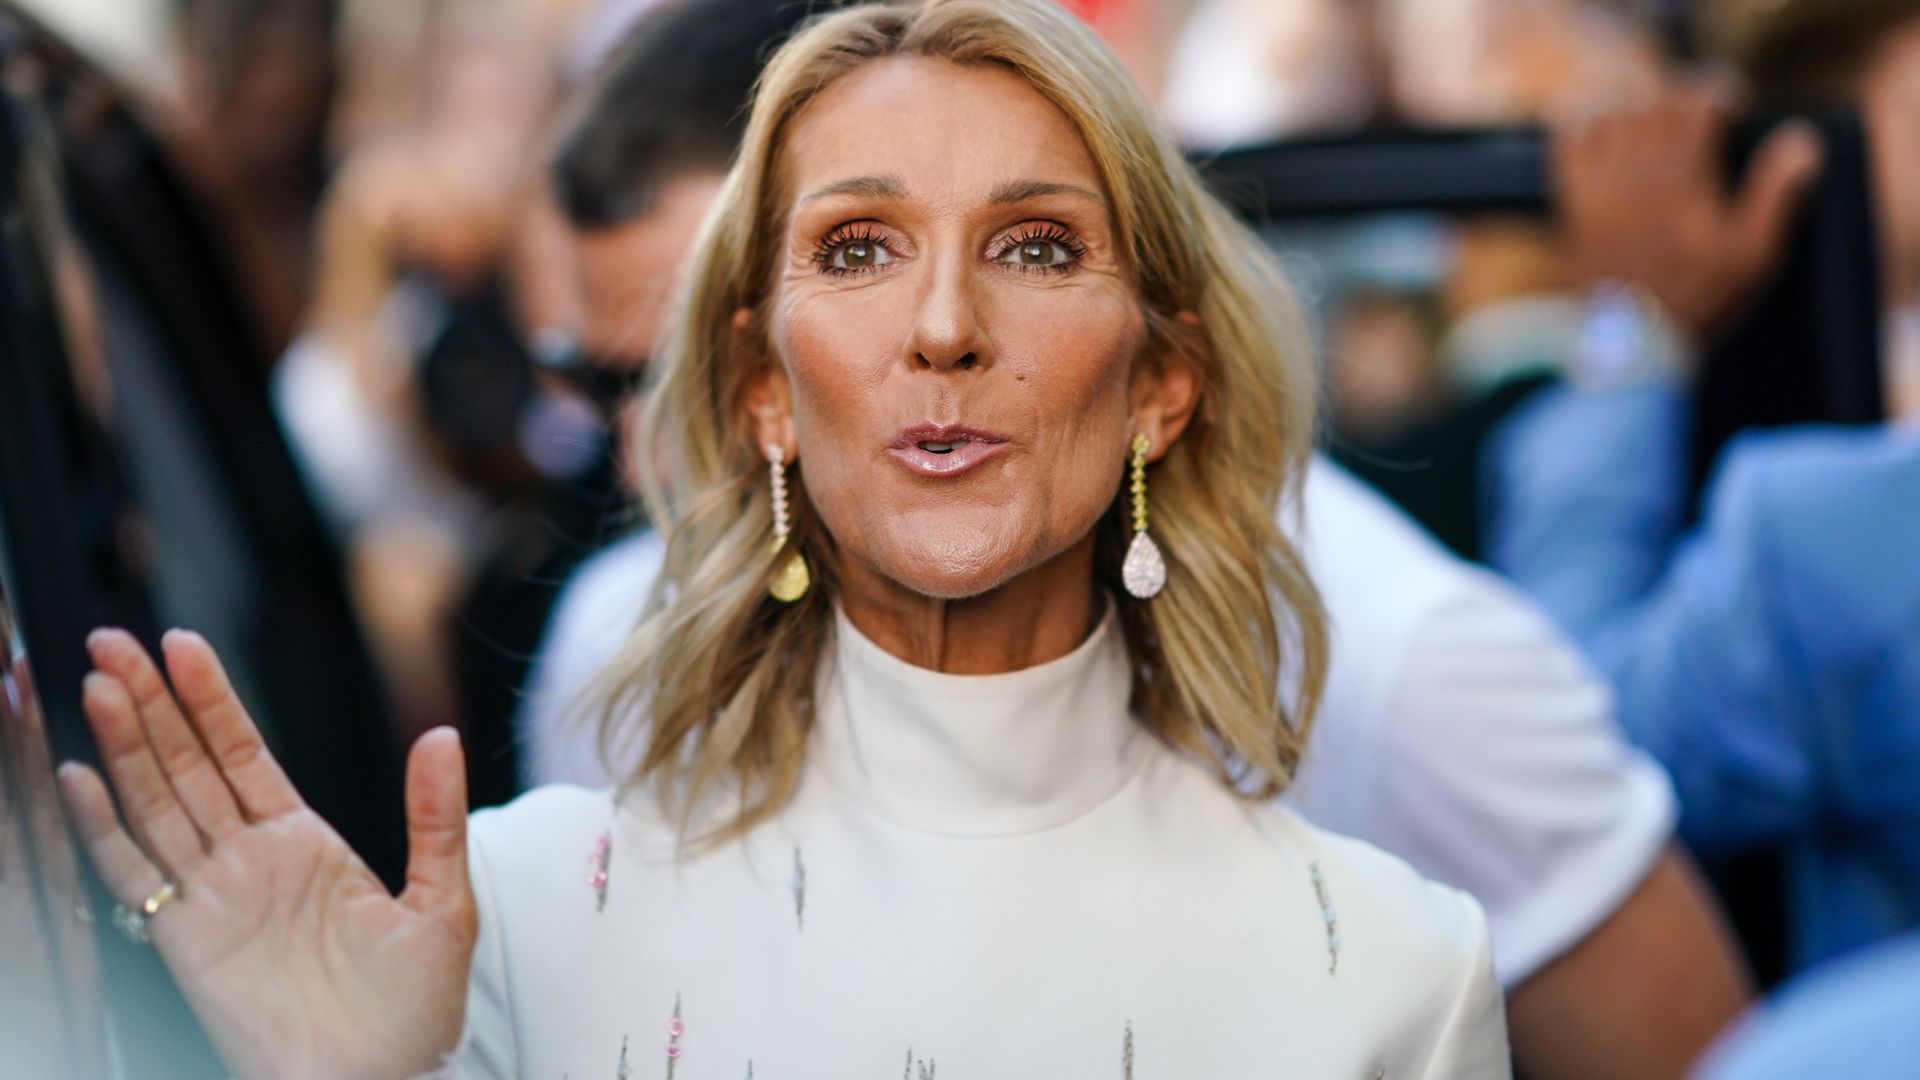 Celine Dion puts on daring display as she makes surprise return to spotlight 